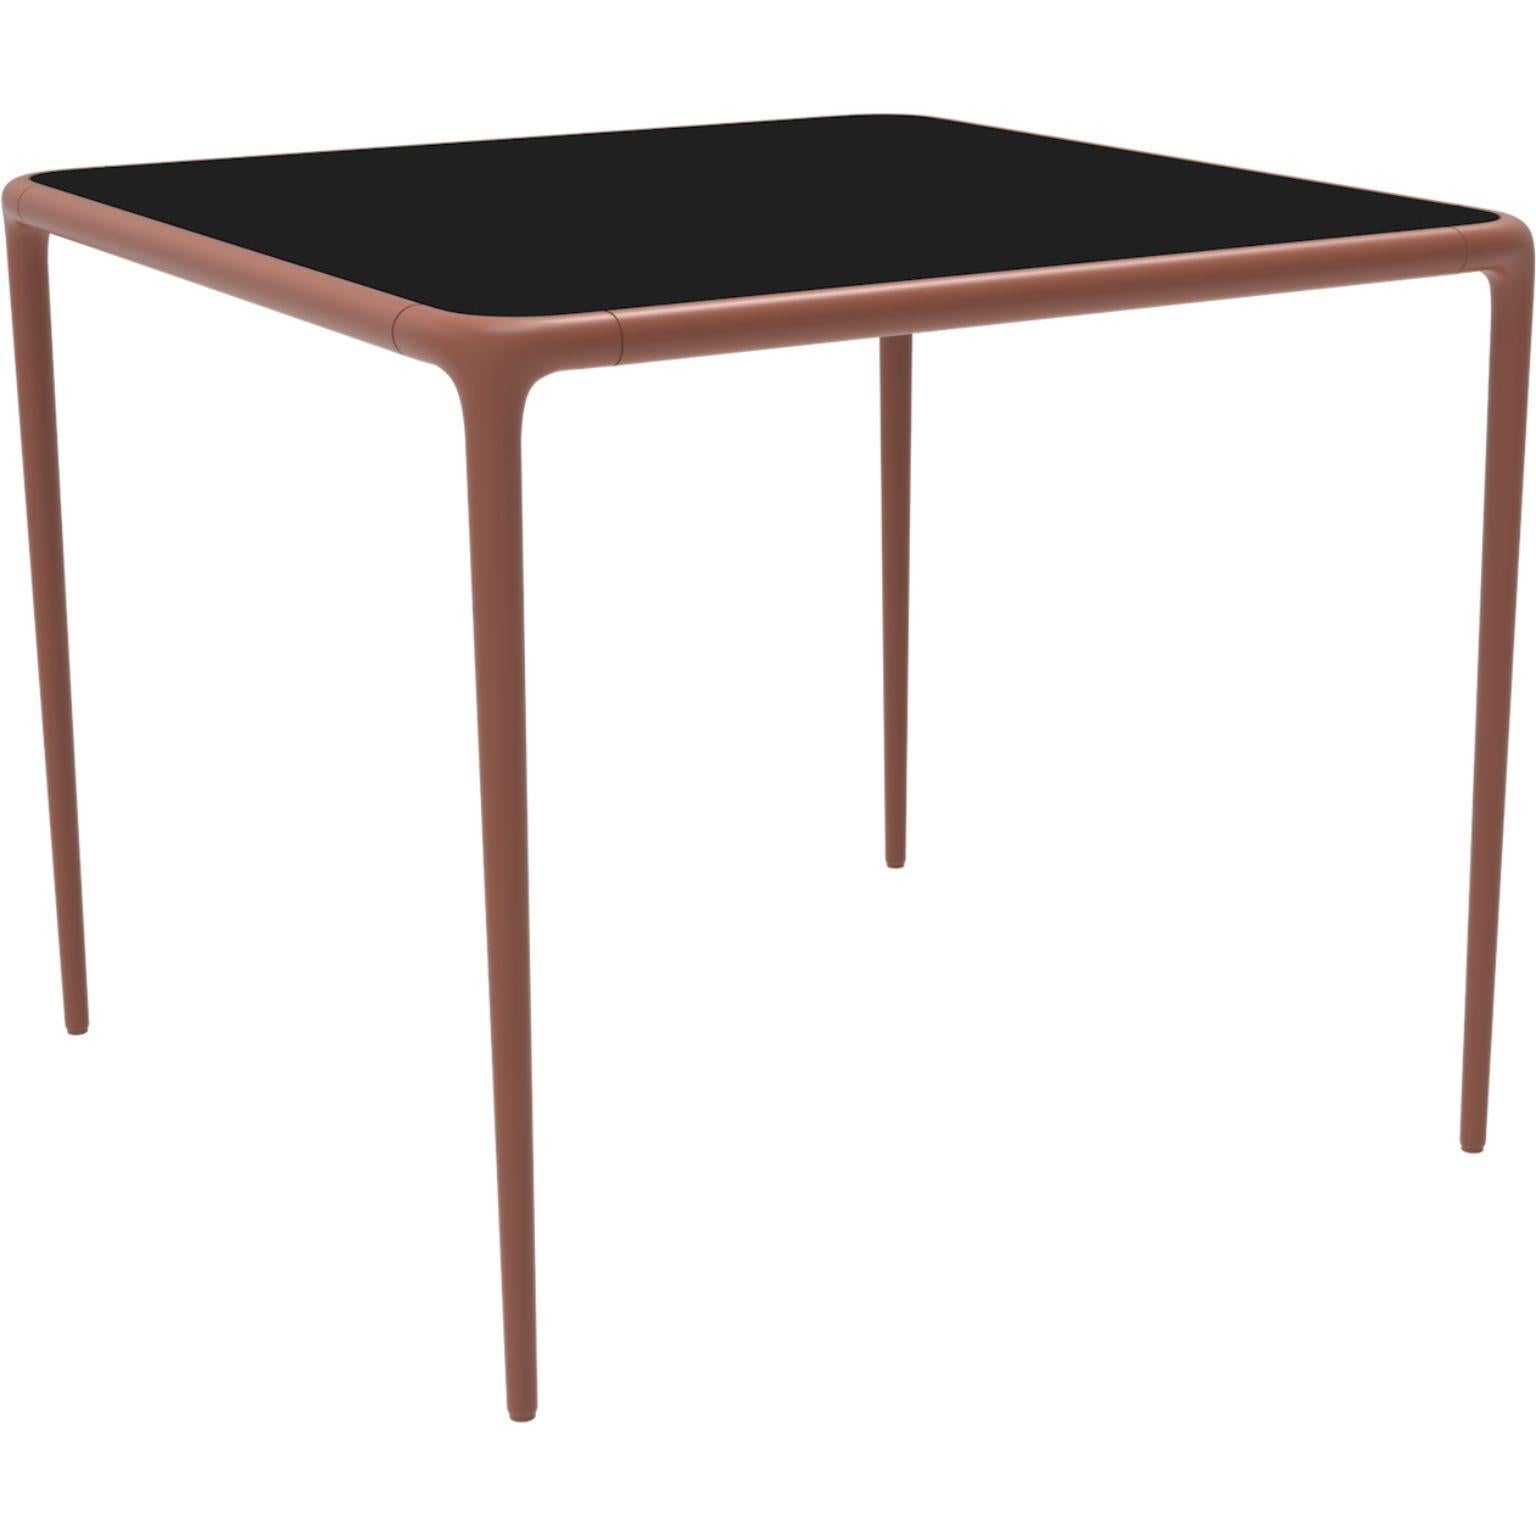 Xaloc Salmon glass top table 90 by Mowee.
Dimensions: D90 x W90 x H74 cm.
Material: Aluminum, tinted tempered glass top.
Also available in different aluminum colors and finishes (HPL Black Edge or Neolith). 

 Xaloc synthesizes the lines of